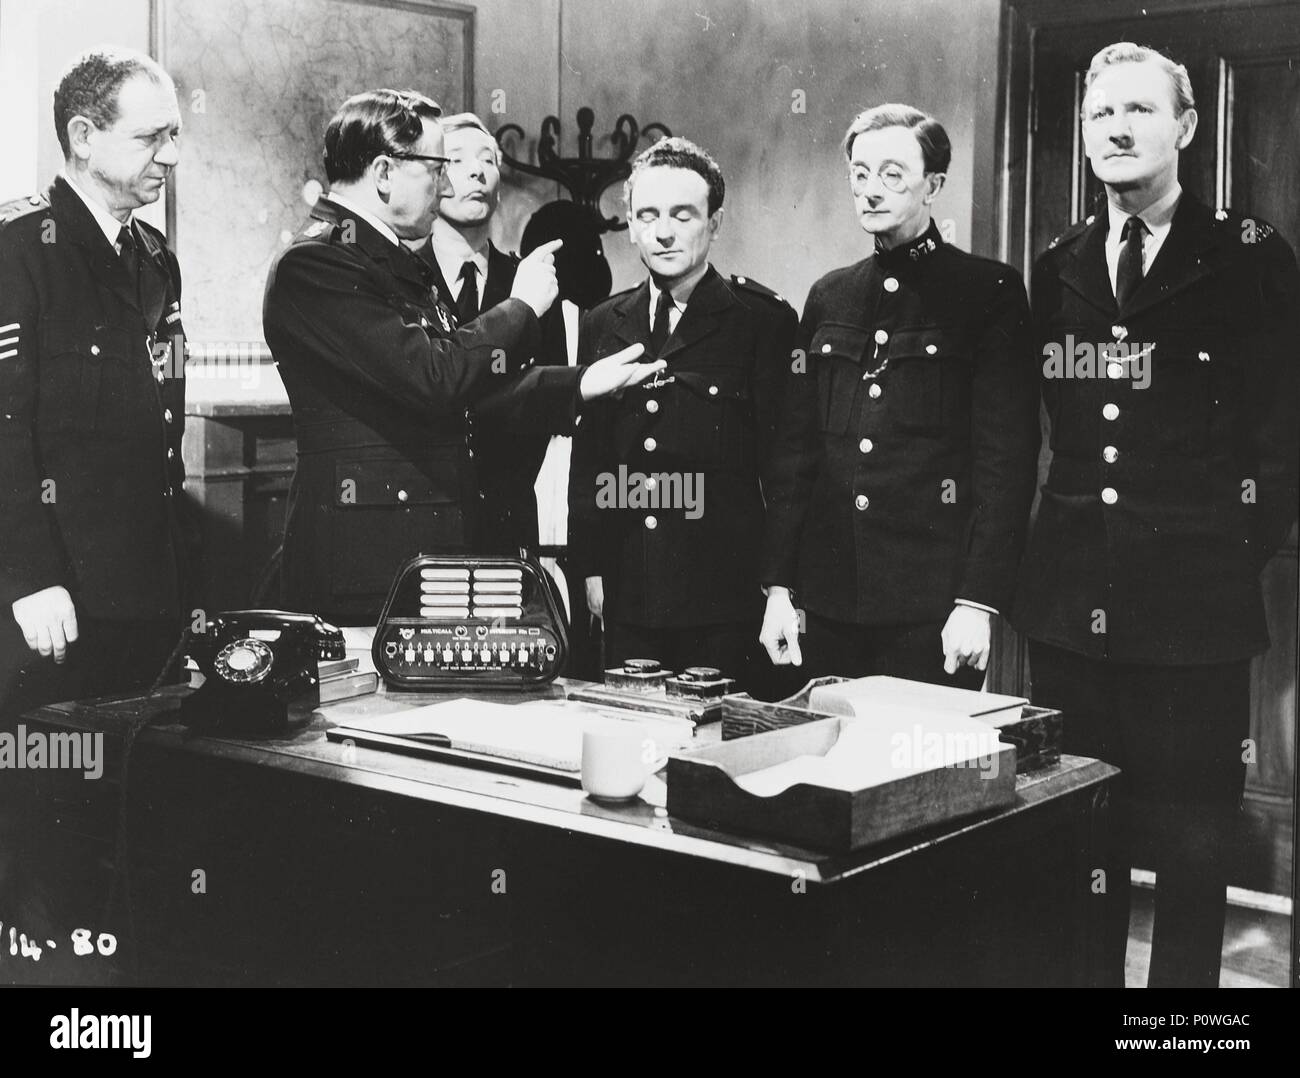 Original Film Title: CARRY ON, CONSTABLE.  English Title: CARRY ON, CONSTABLE.  Film Director: GERALD THOMAS.  Year: 1960.  Stars: CHARLES HAWTREY; KENNETH WILLIAMS; SID JAMES; KENNETH CONNOR; LESLIE PHILLIPS; CYRIL CHAMBERLAIN. Credit: ANGLO AMALGAMATED / Album Stock Photo